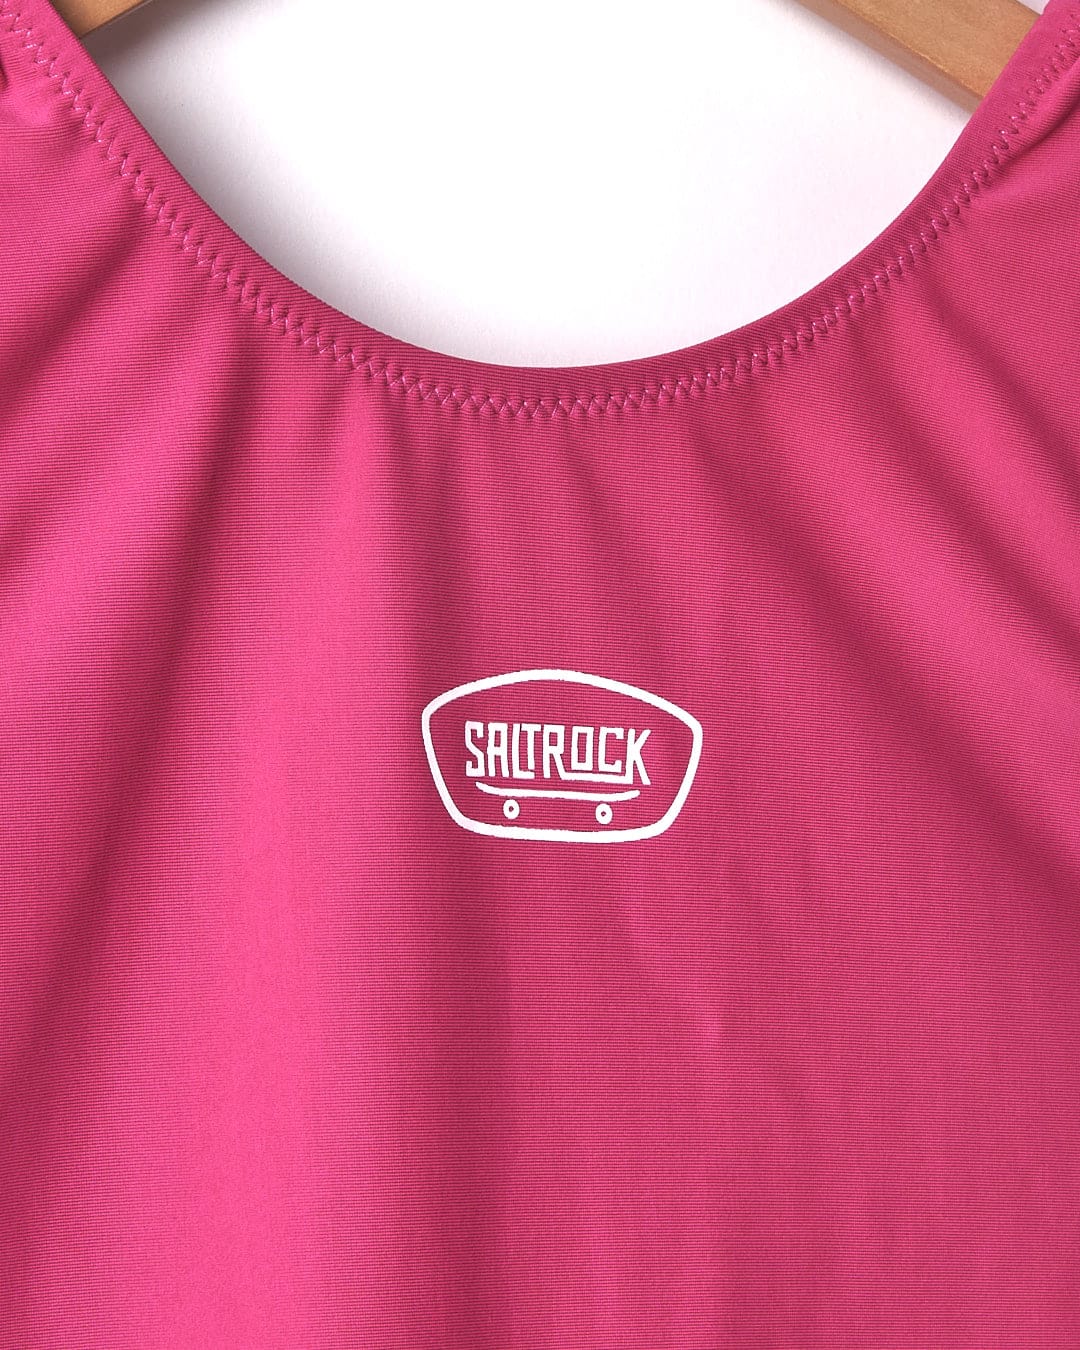 A Sunny - Kids Swimsuit - Pink by Saltrock with a white logo on it.